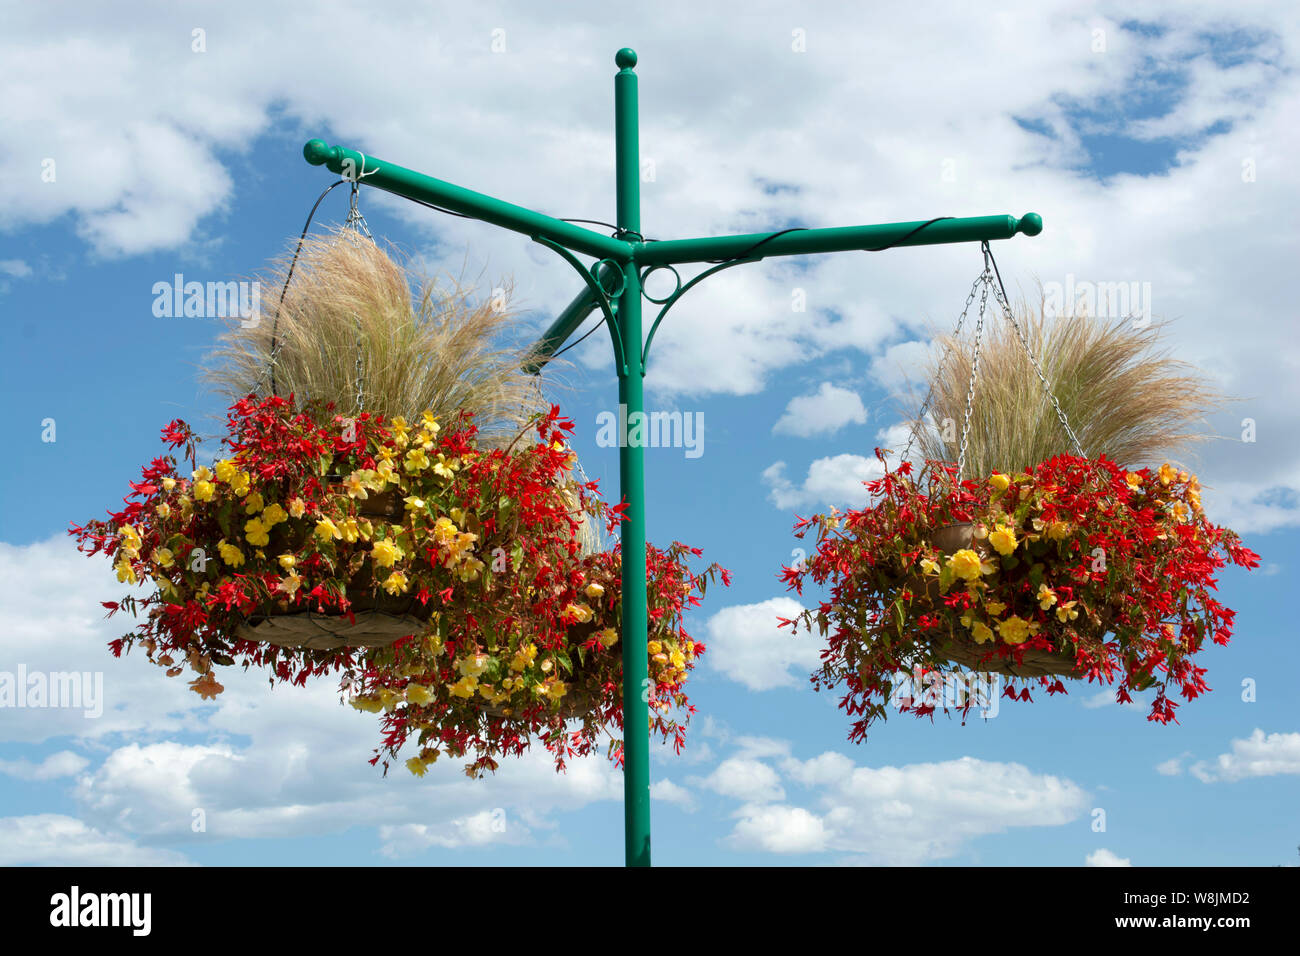 Hanging planters for flowers and natural grass in public location Stock Photo